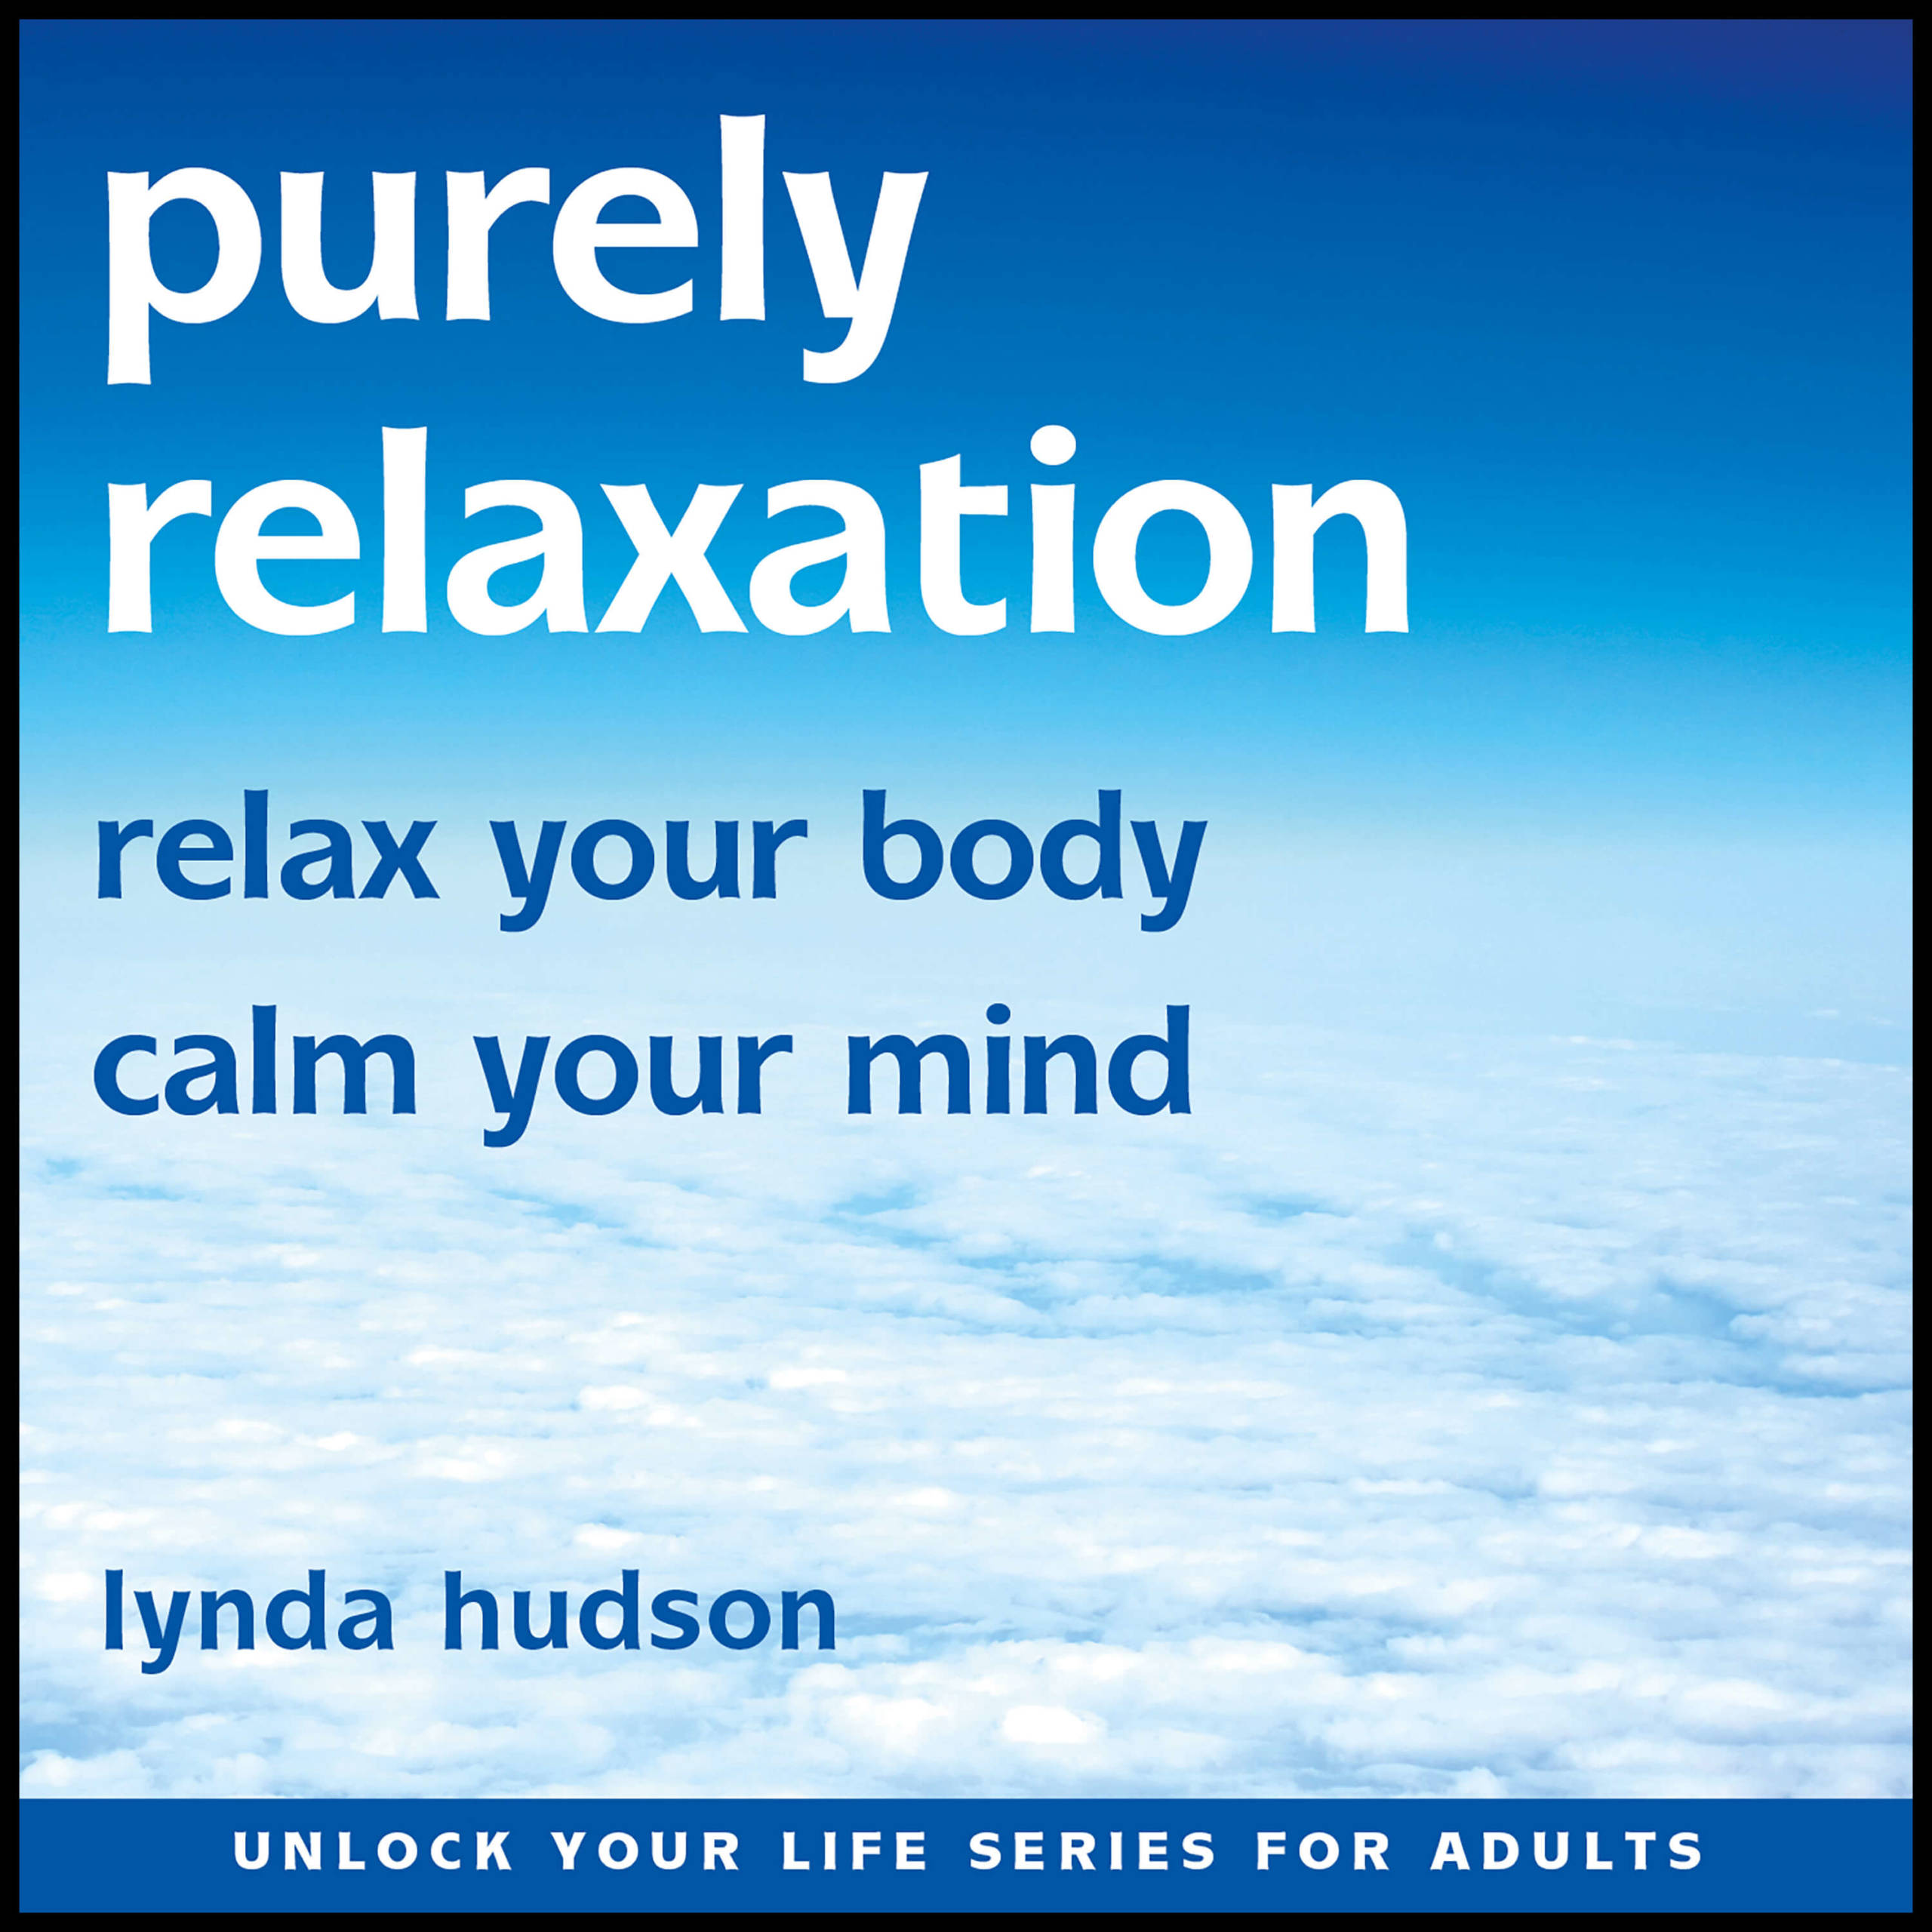 Purely relaxation